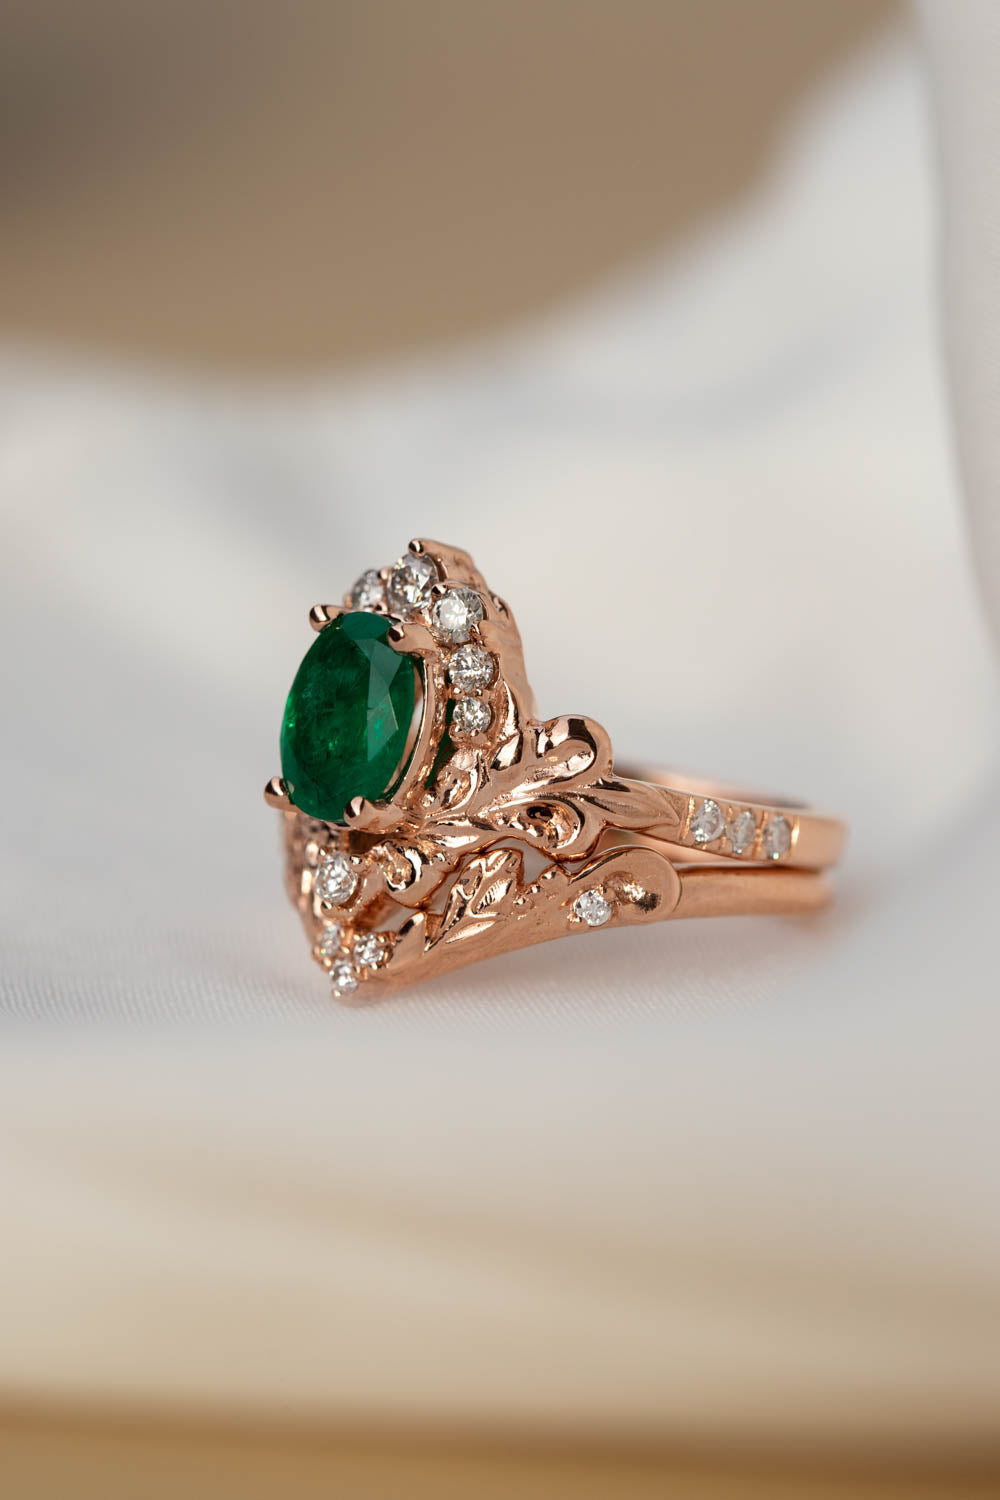 Rose gold engagement ring with emerald, crown shape gold ring with diamonds / Sophie - Eden Garden Jewelry™